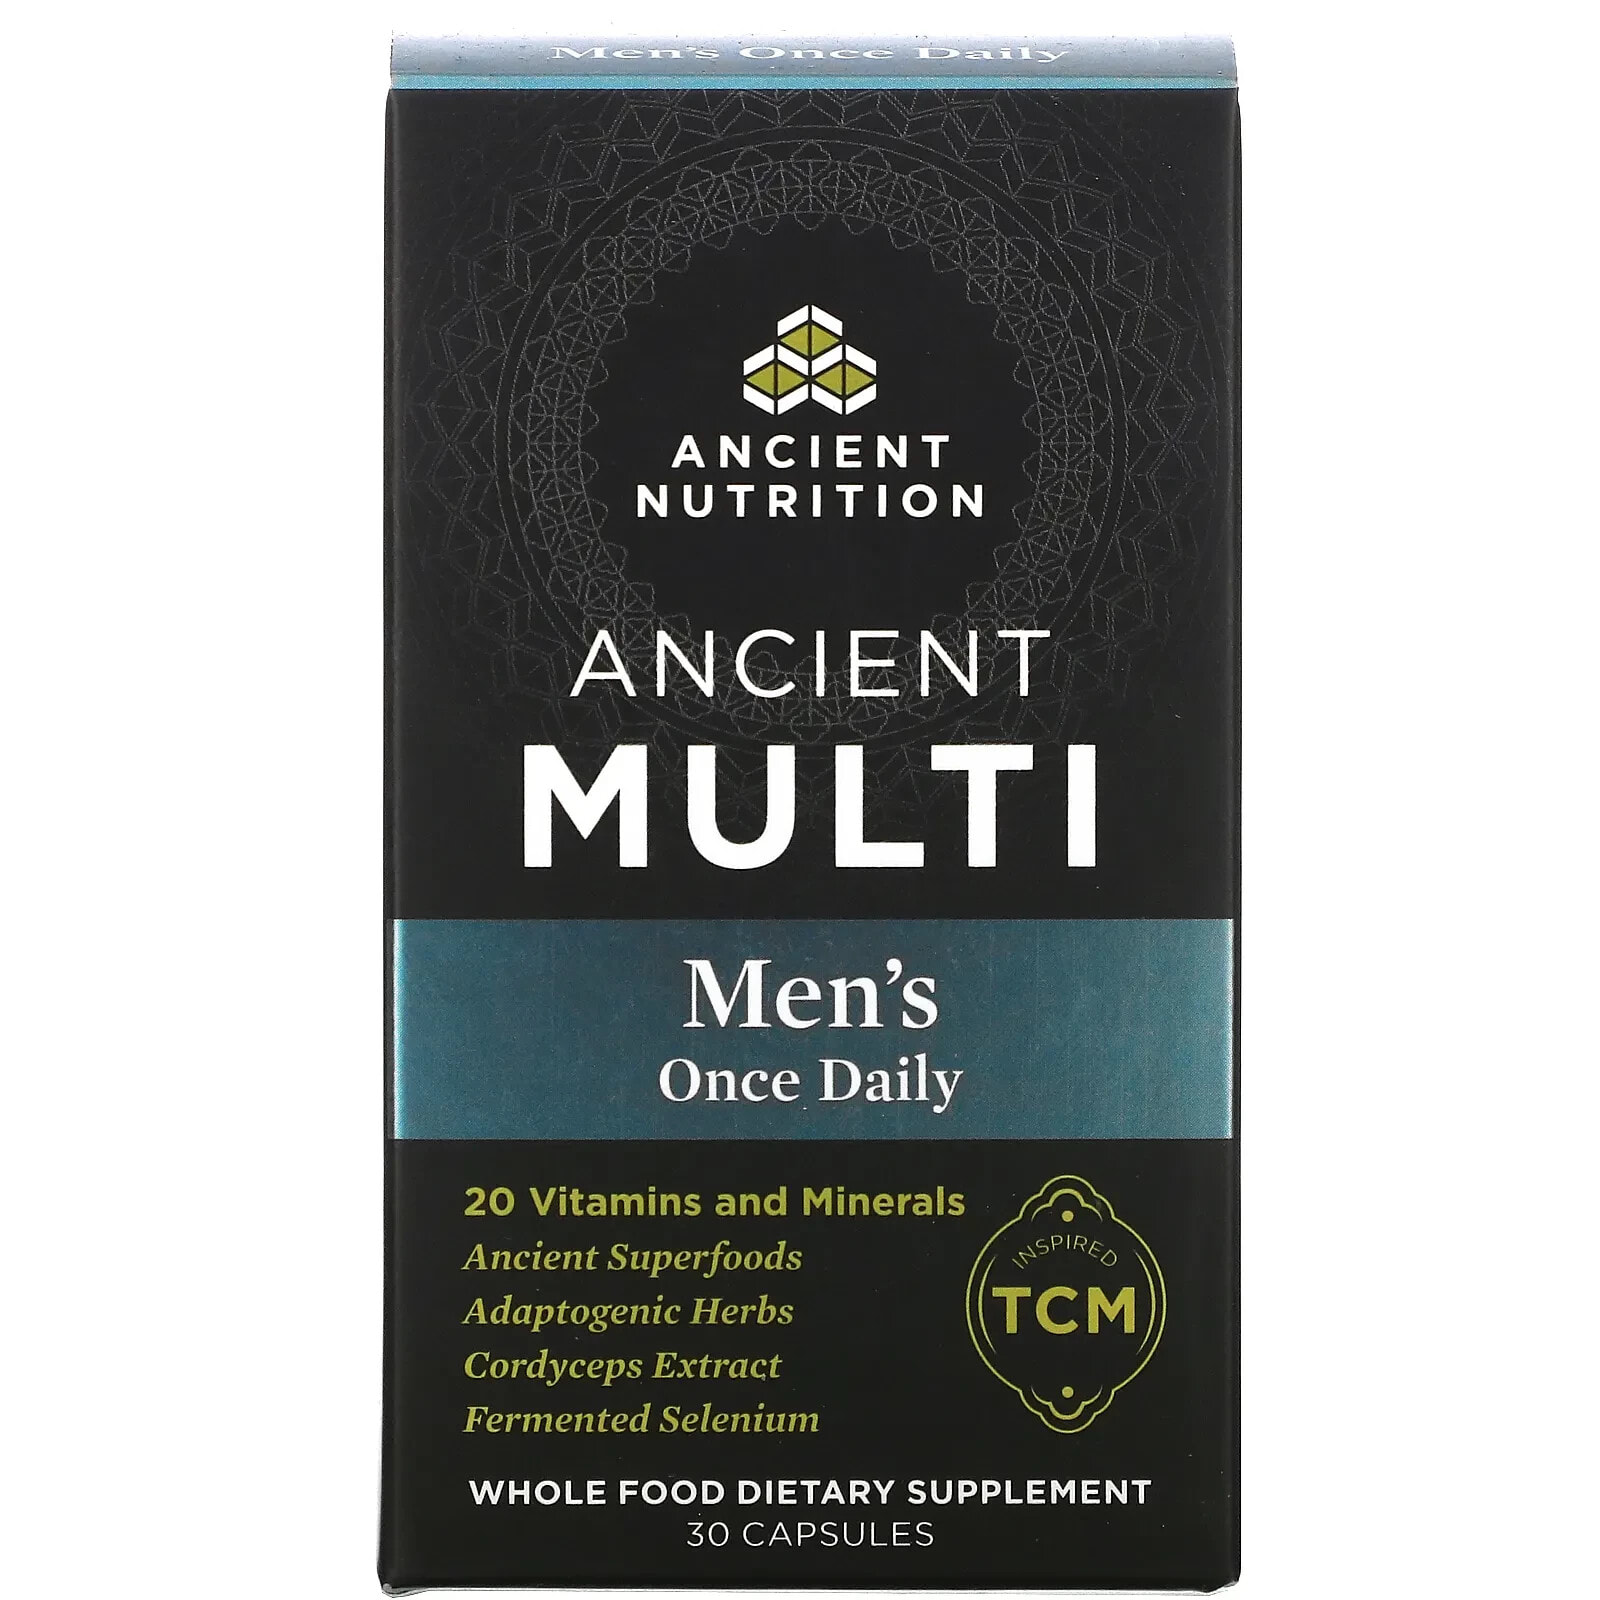 Men's Once Daily Multi, 30 Capsules